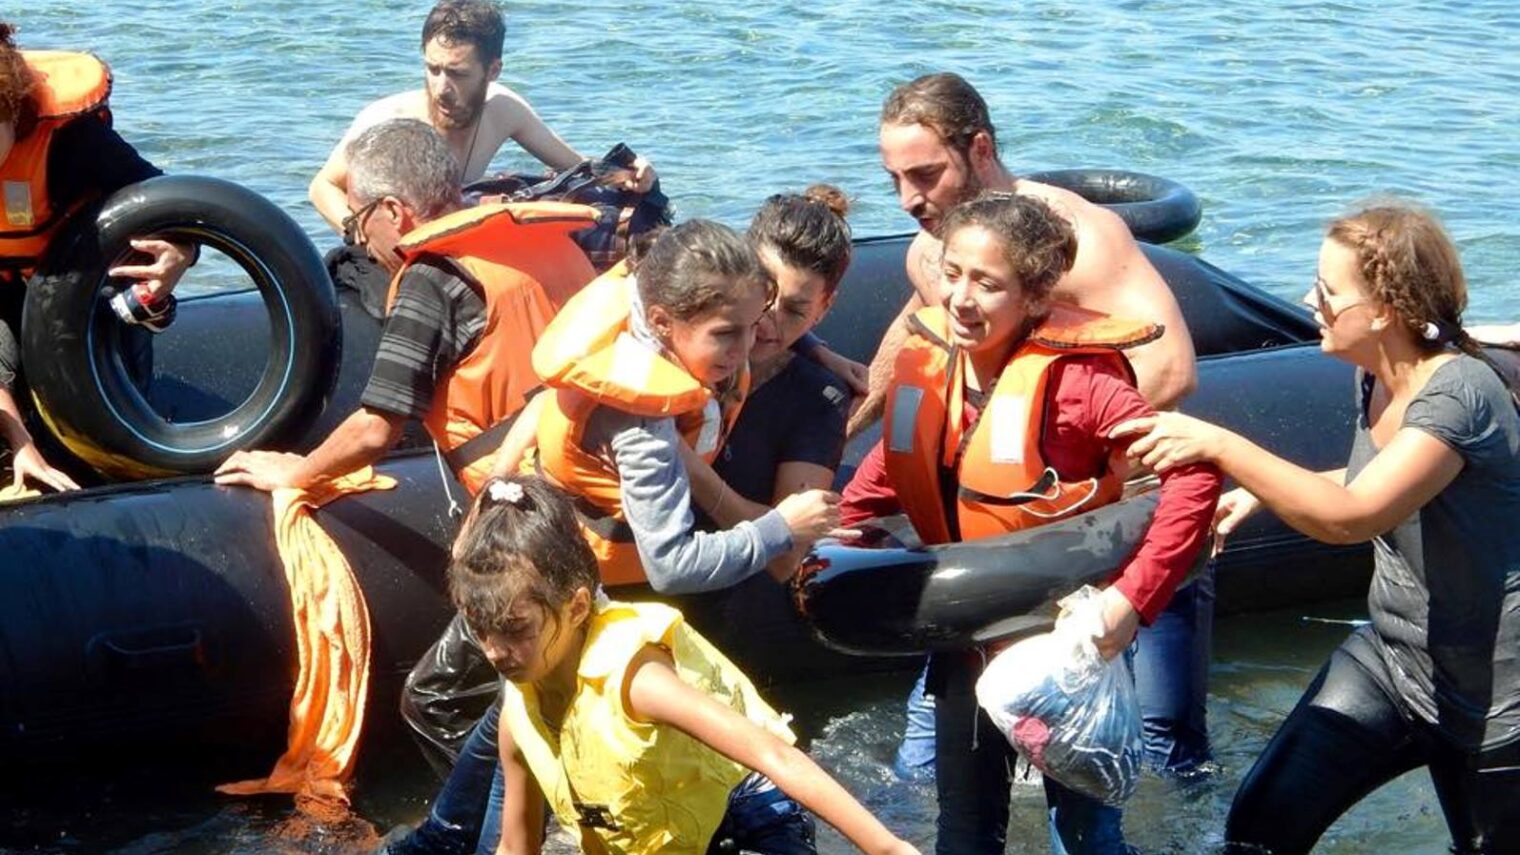 IsraAid volunteers including Naama Gorodischer, center, helping refugees reach the shore after their boat overturned off the Greek coast, September 13, 2015. Photo via Facebook